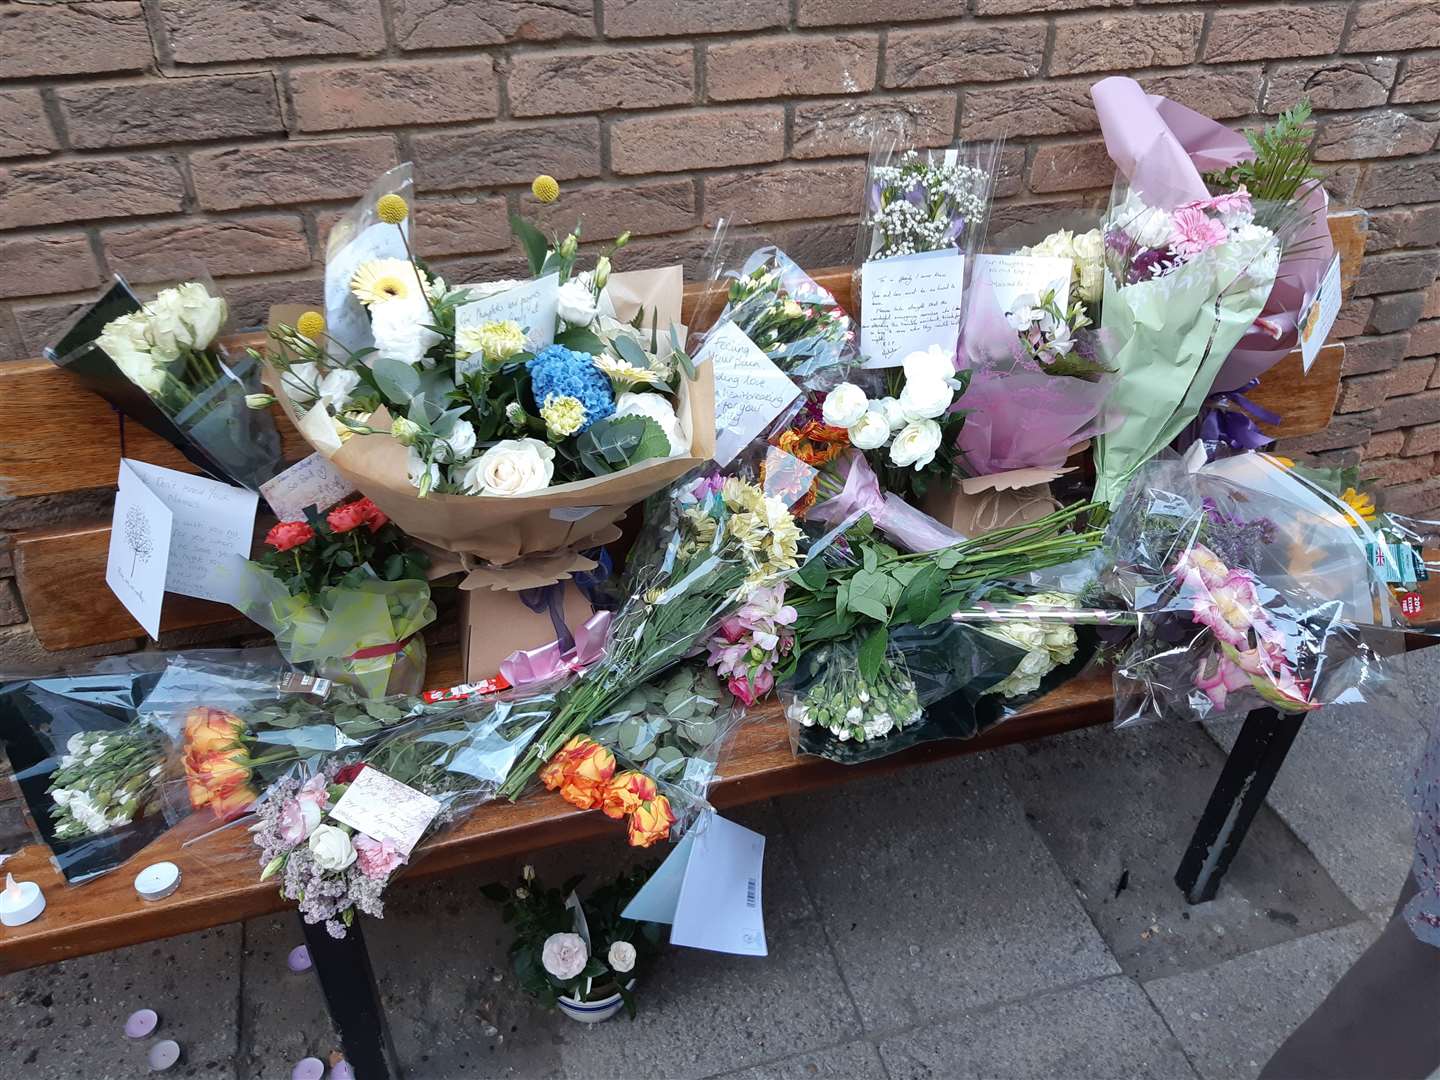 Flower tributes cover a bench at the scene in Ramsgate